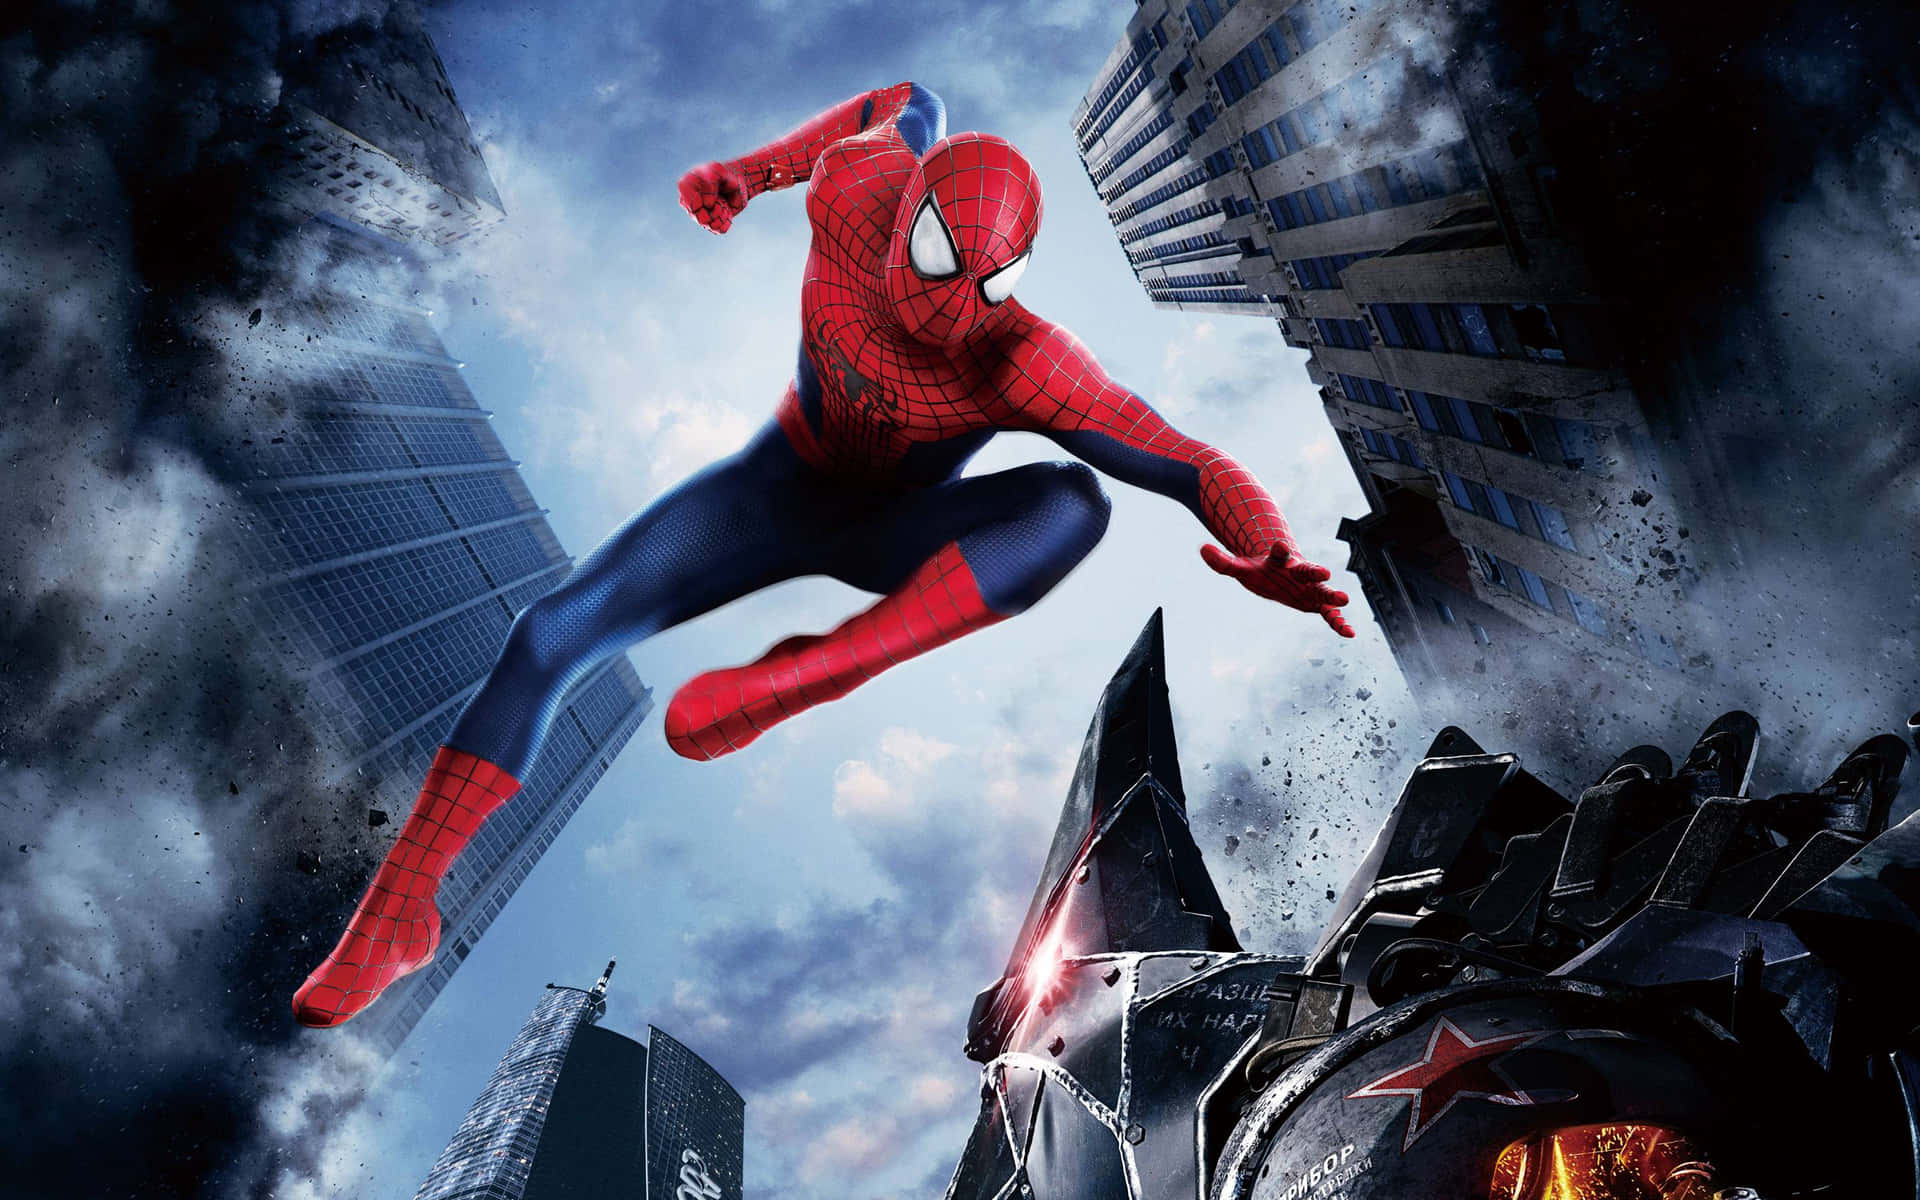 "Peter Parker is Spider-Man — Fighting crime and saving the city" Wallpaper